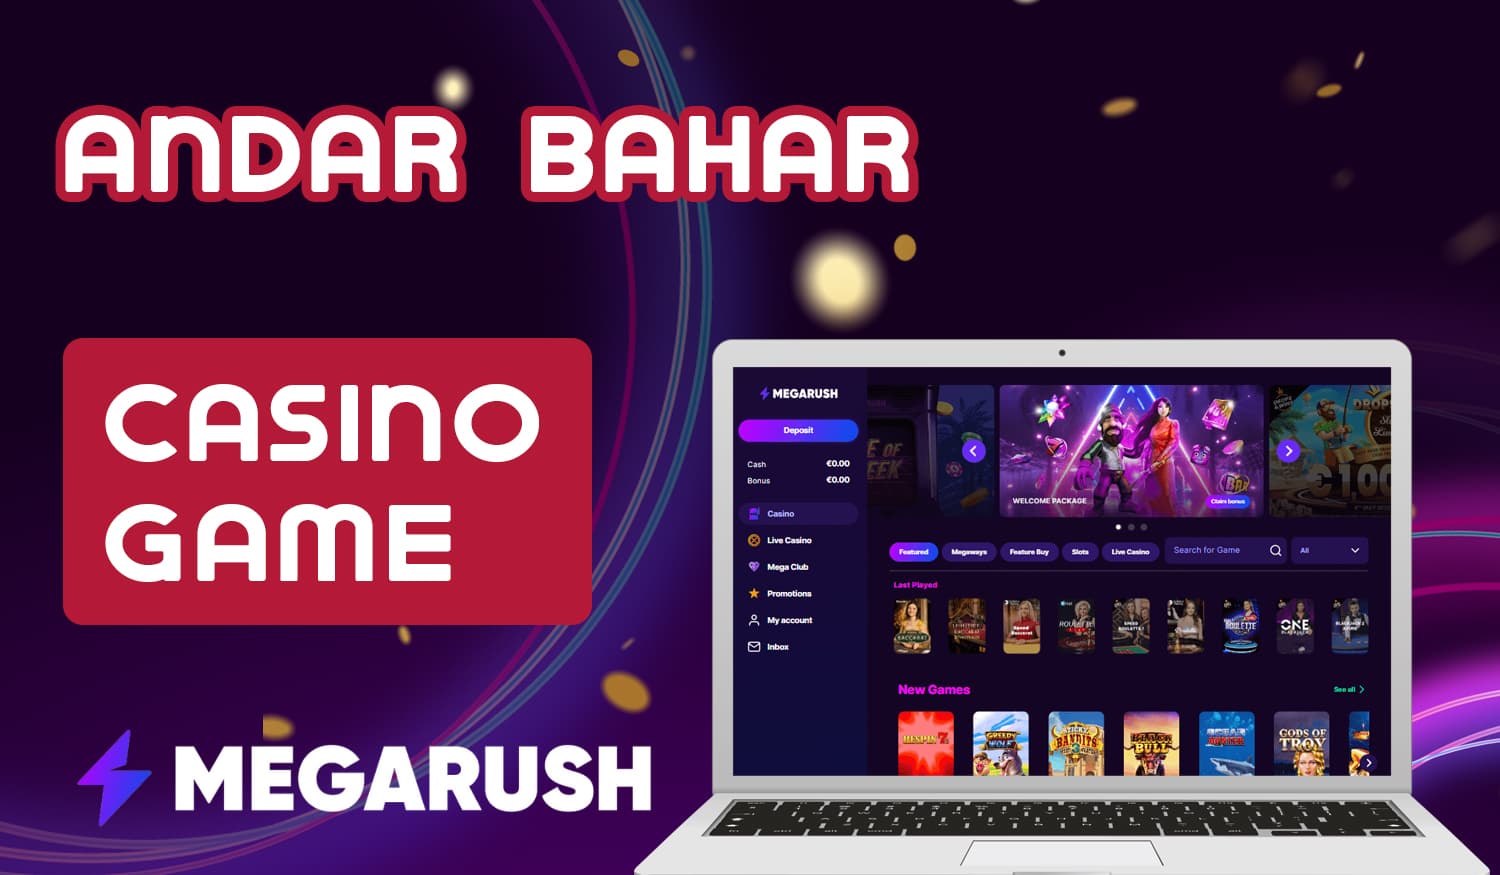 Which providers offer games in the online casino section of the Megarush India site